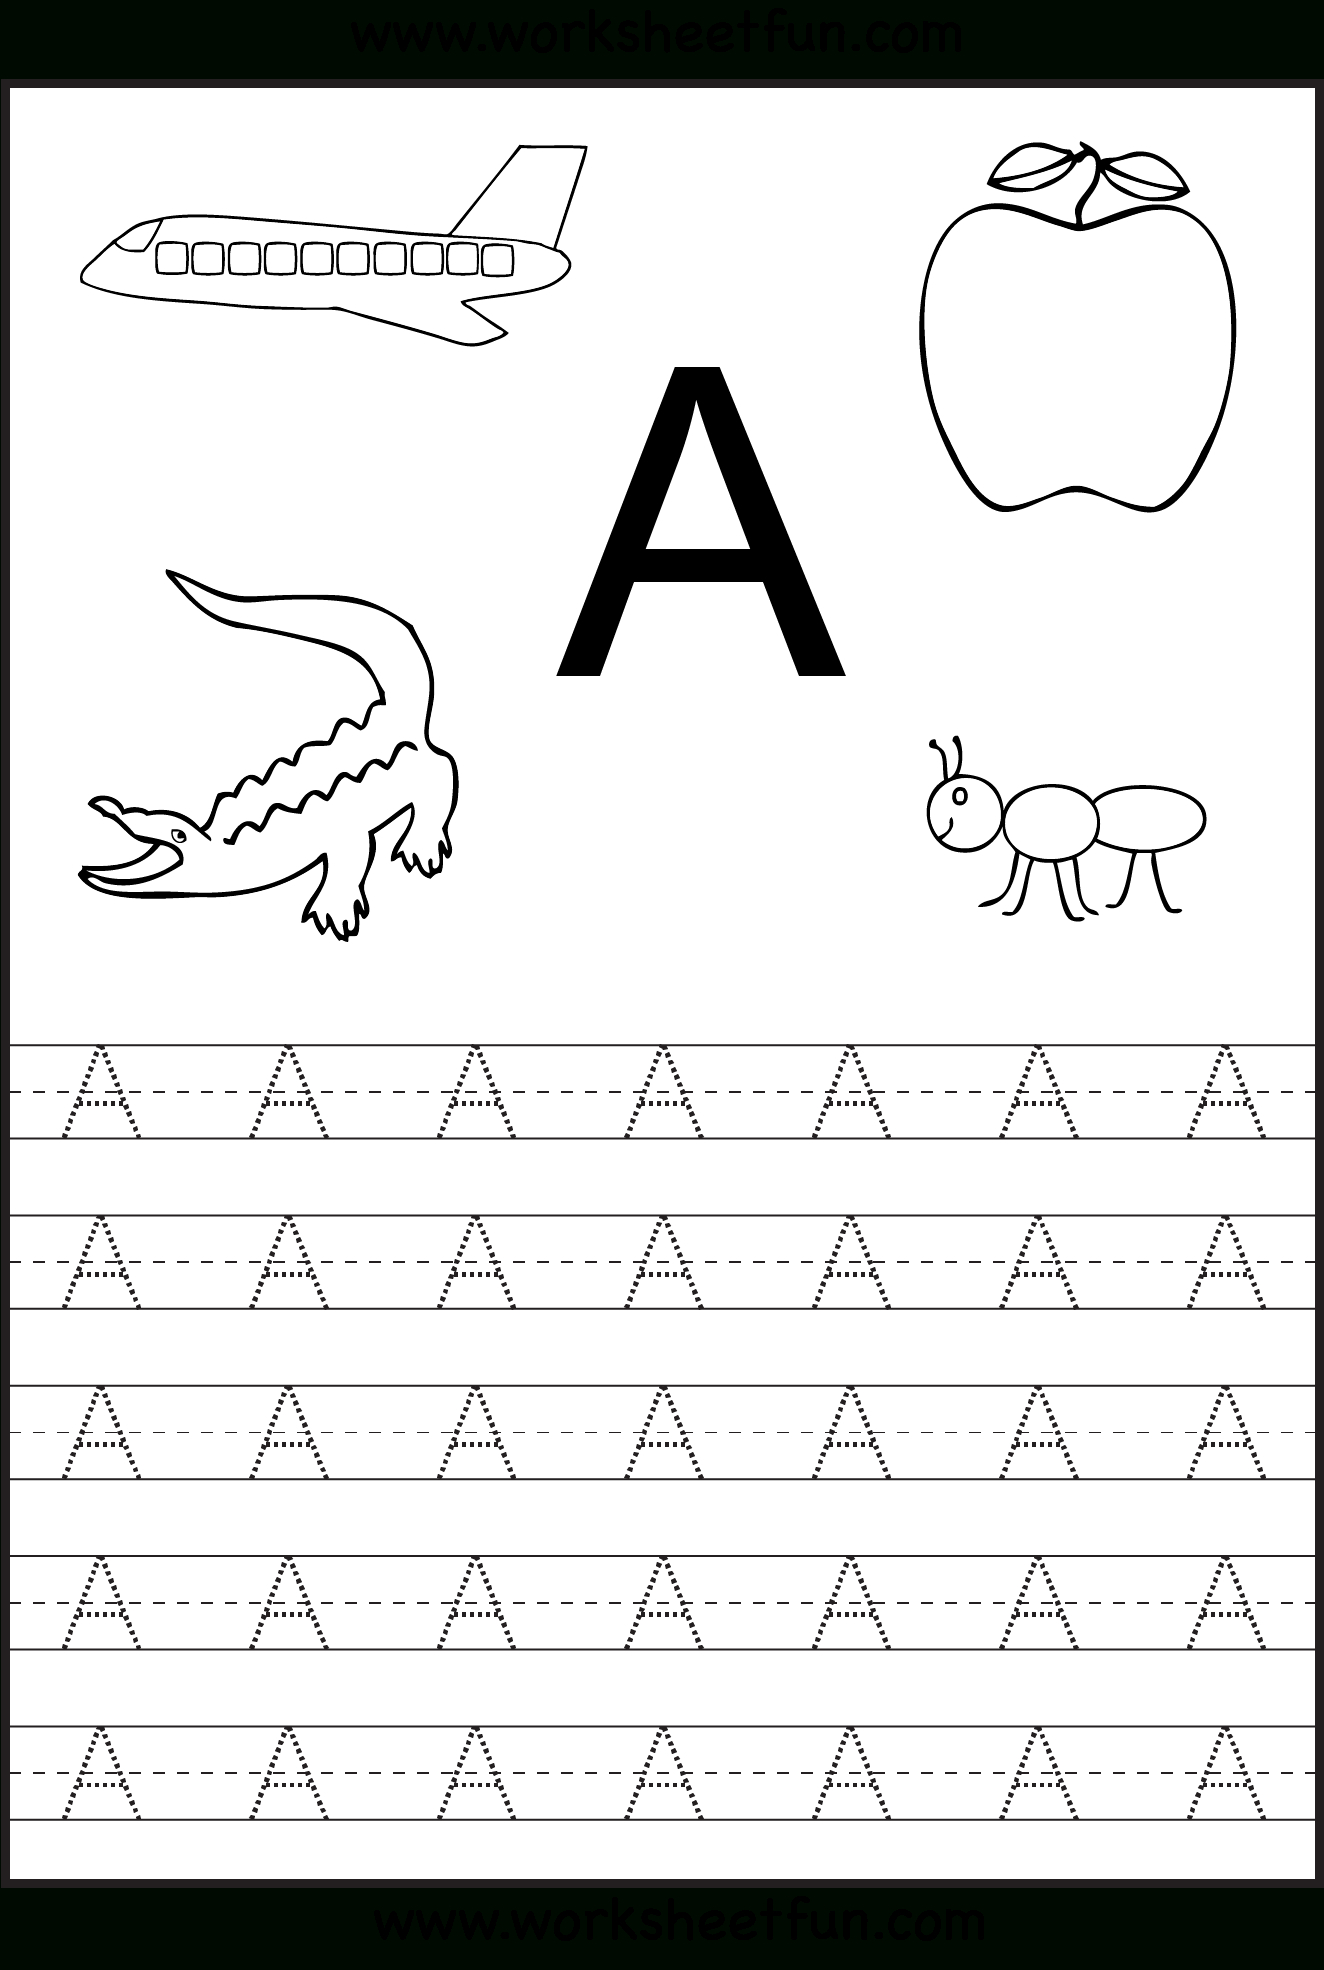 Free Printable Worksheets: Letter Tracing Worksheets For - Free Printable Letter Tracing